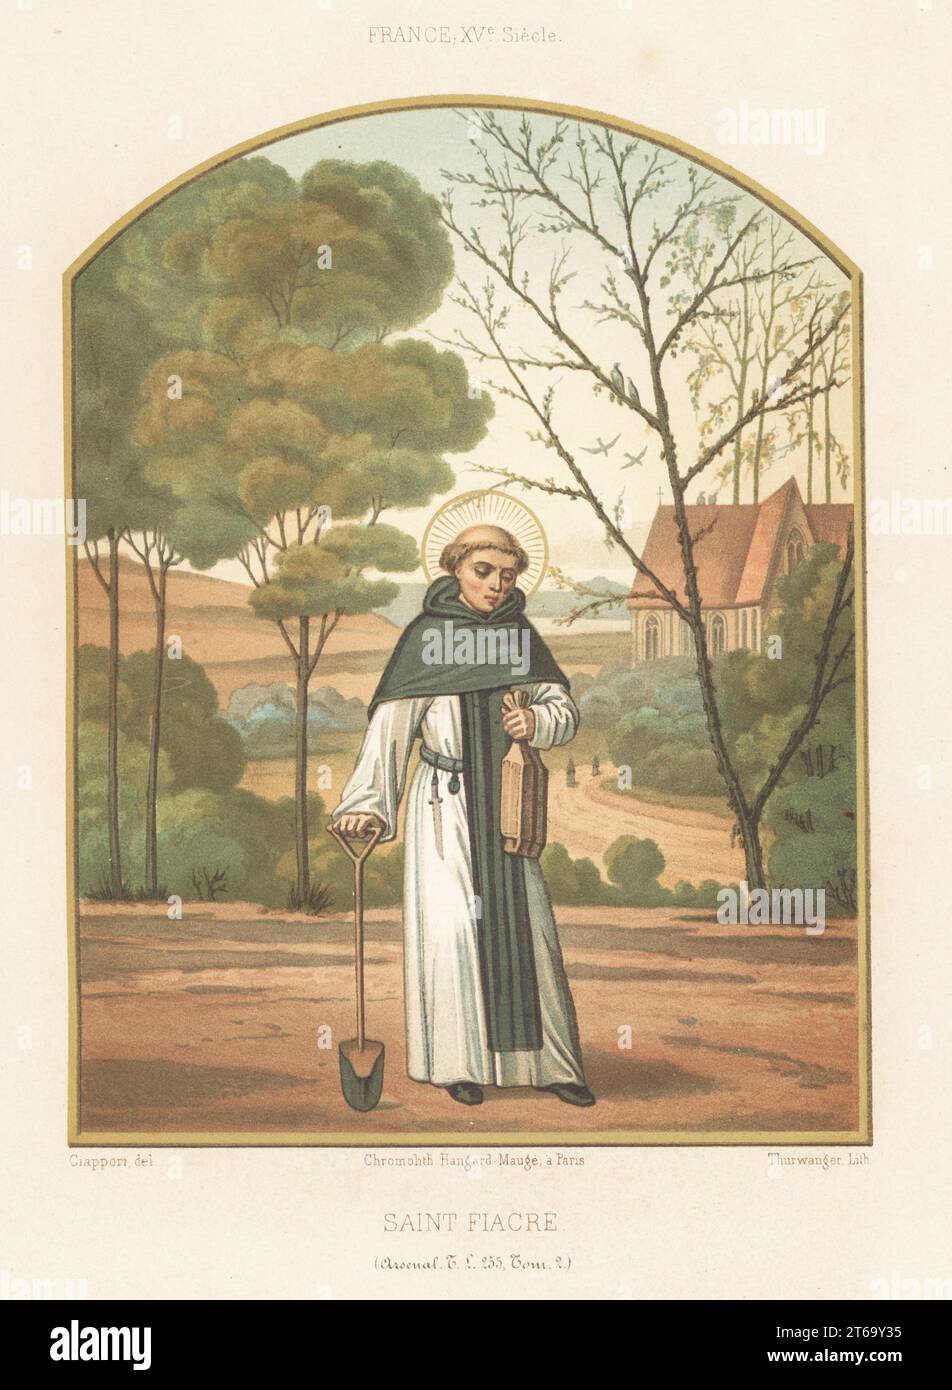 Saint Fiacre of Breuil with spade and bag of seeds. Catholic priest, abbot, hermit and gardener, c. 600-670. Taken from a 15th century Book of Hours, livre d'heures, MS Tl 255, Tom. 2, Bibliotheque de l'Arsenal. Chromolithograph by Thurwanger after an illustration by Claudius Joseph Ciappori from Charles Louandres Les Arts Somptuaires, The Sumptuary Arts, Hangard-Mauge, Paris, 1858. Stock Photo